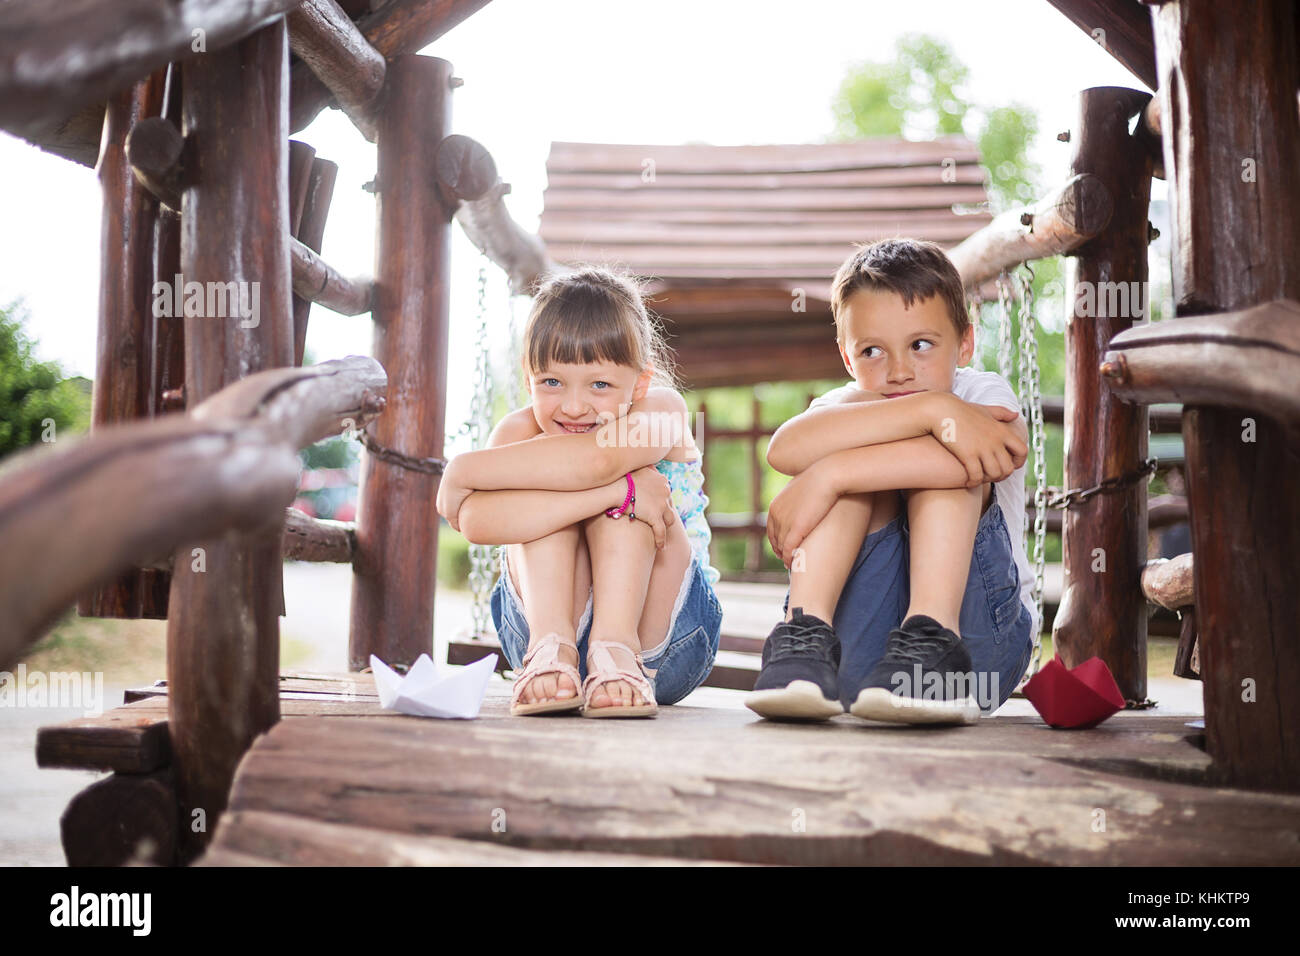 Two young caucasian children sitting next to each other with bent knees in a wooden house, outdoors on sunny summer day. They look innocent Stock Photo